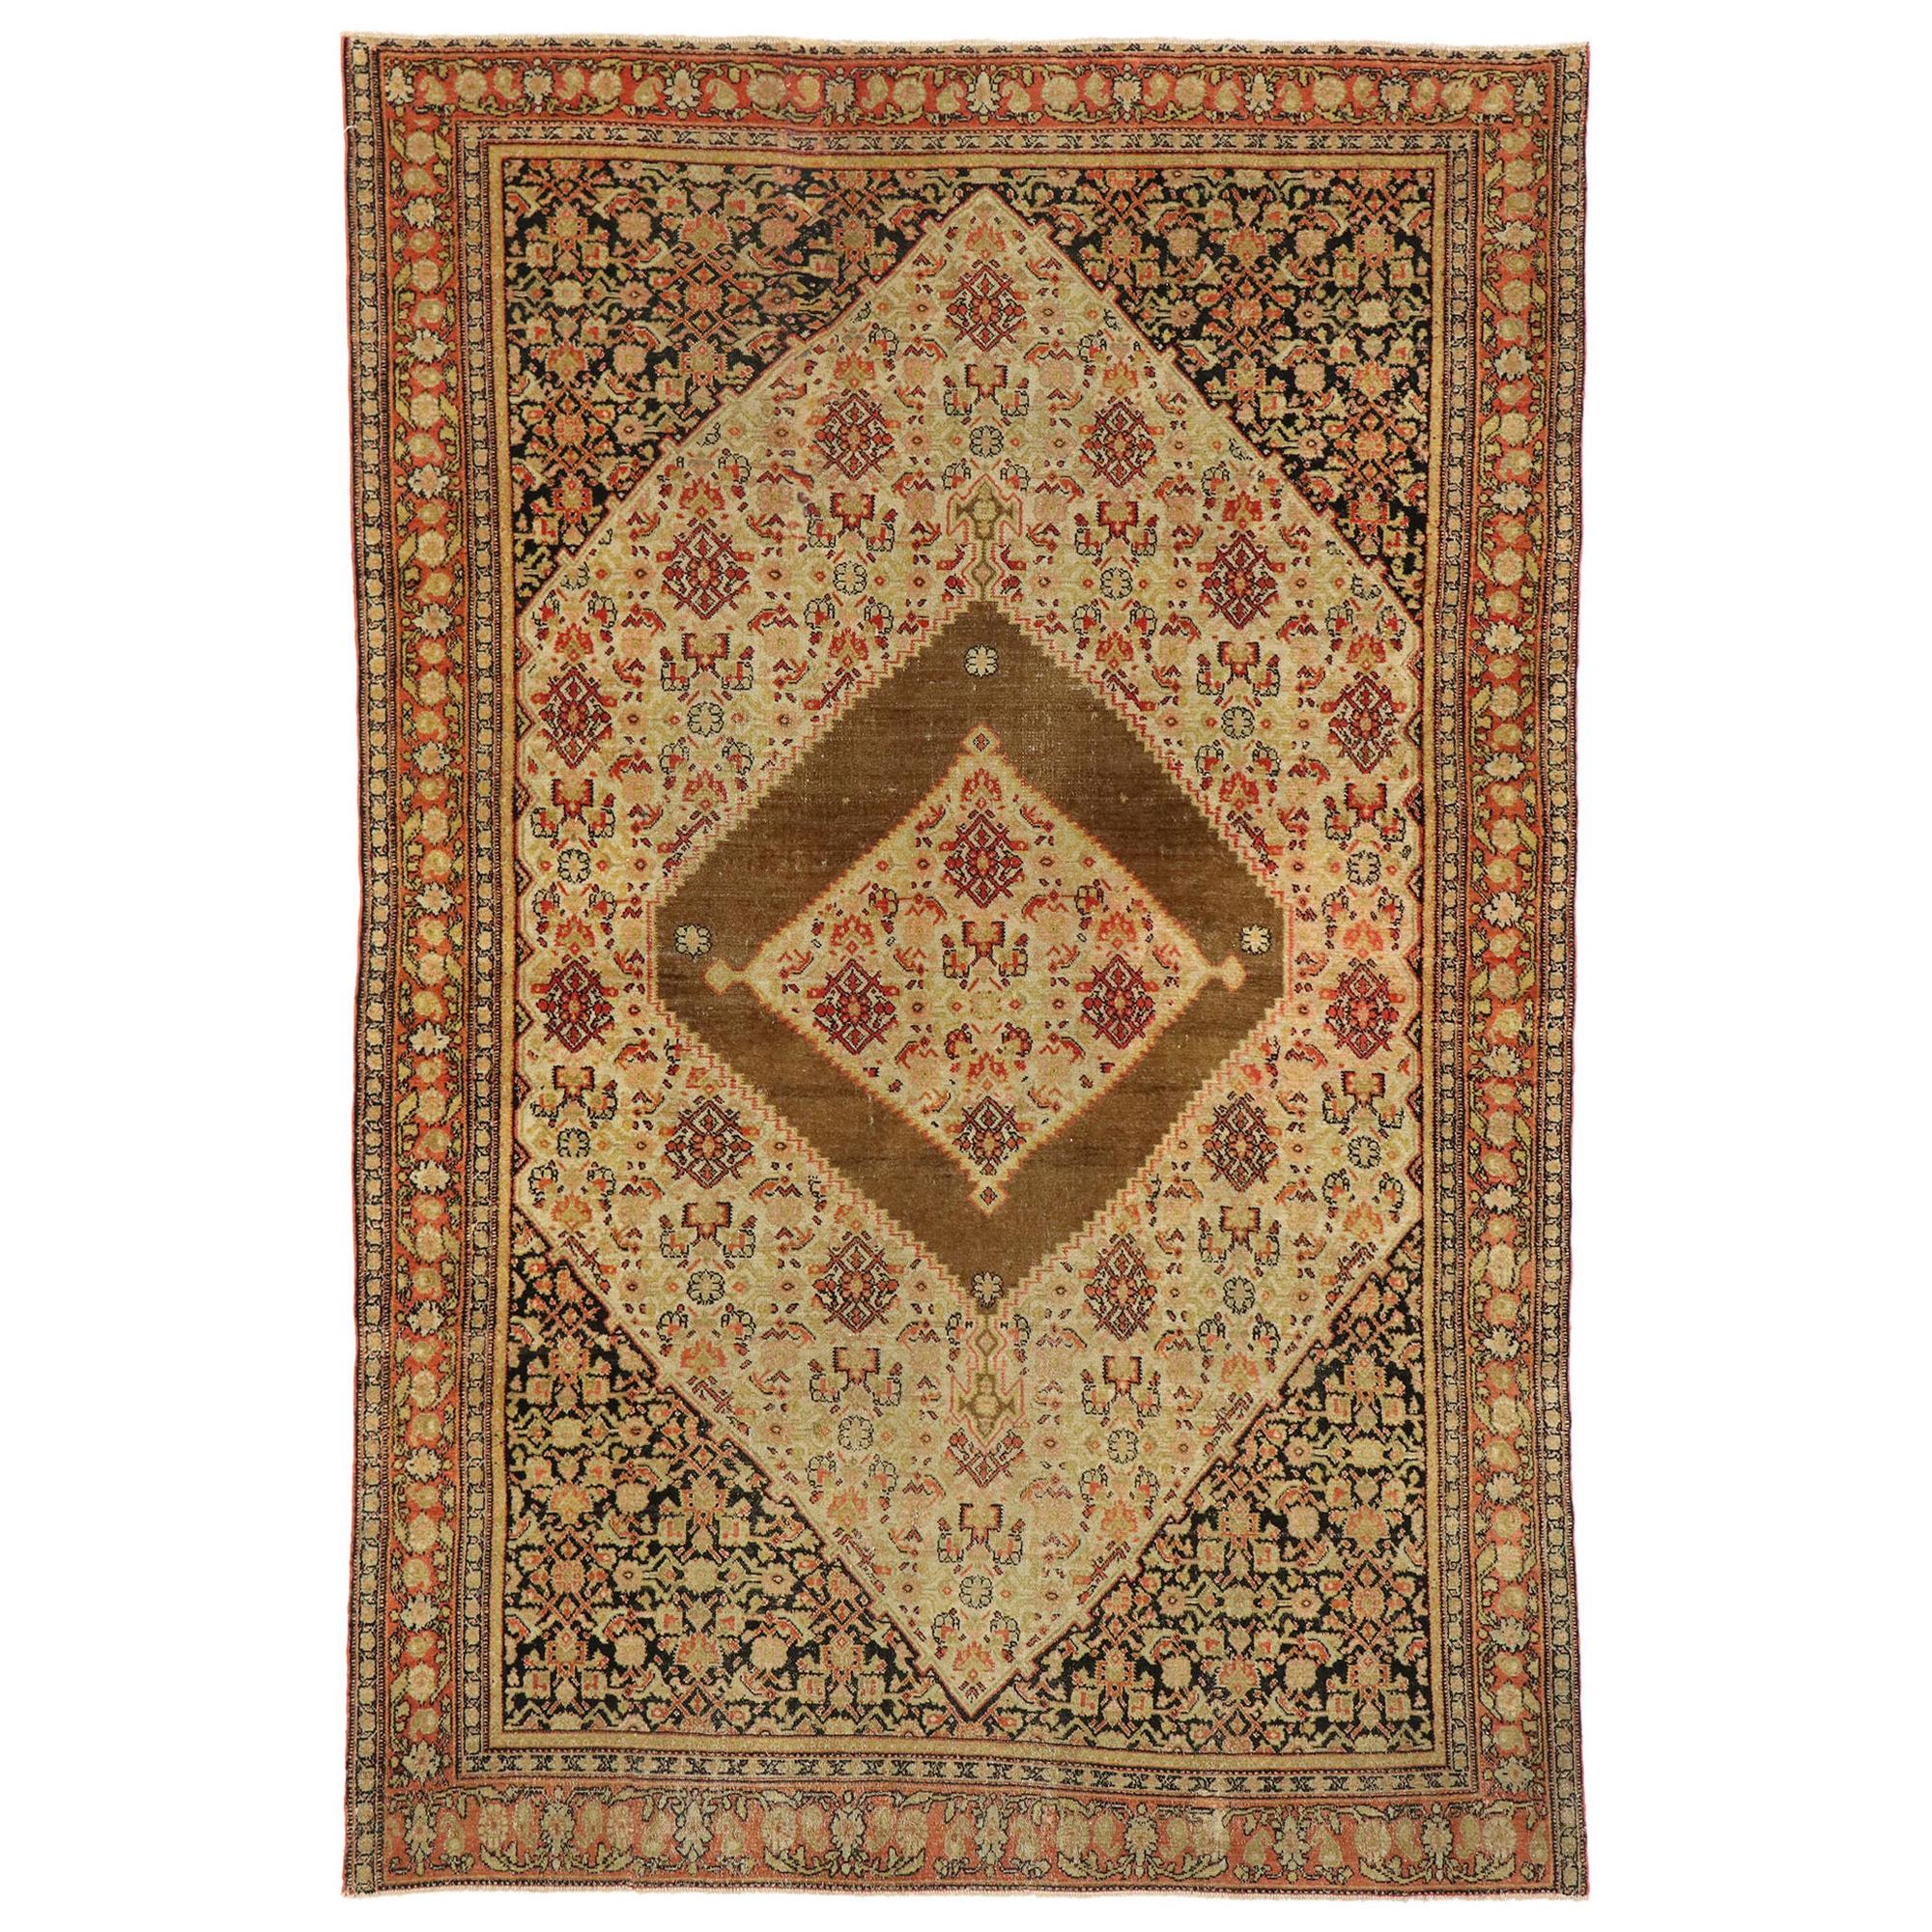 Distressed Antique Persian Senneh Rug with Rustic Mid-Century Modern Style